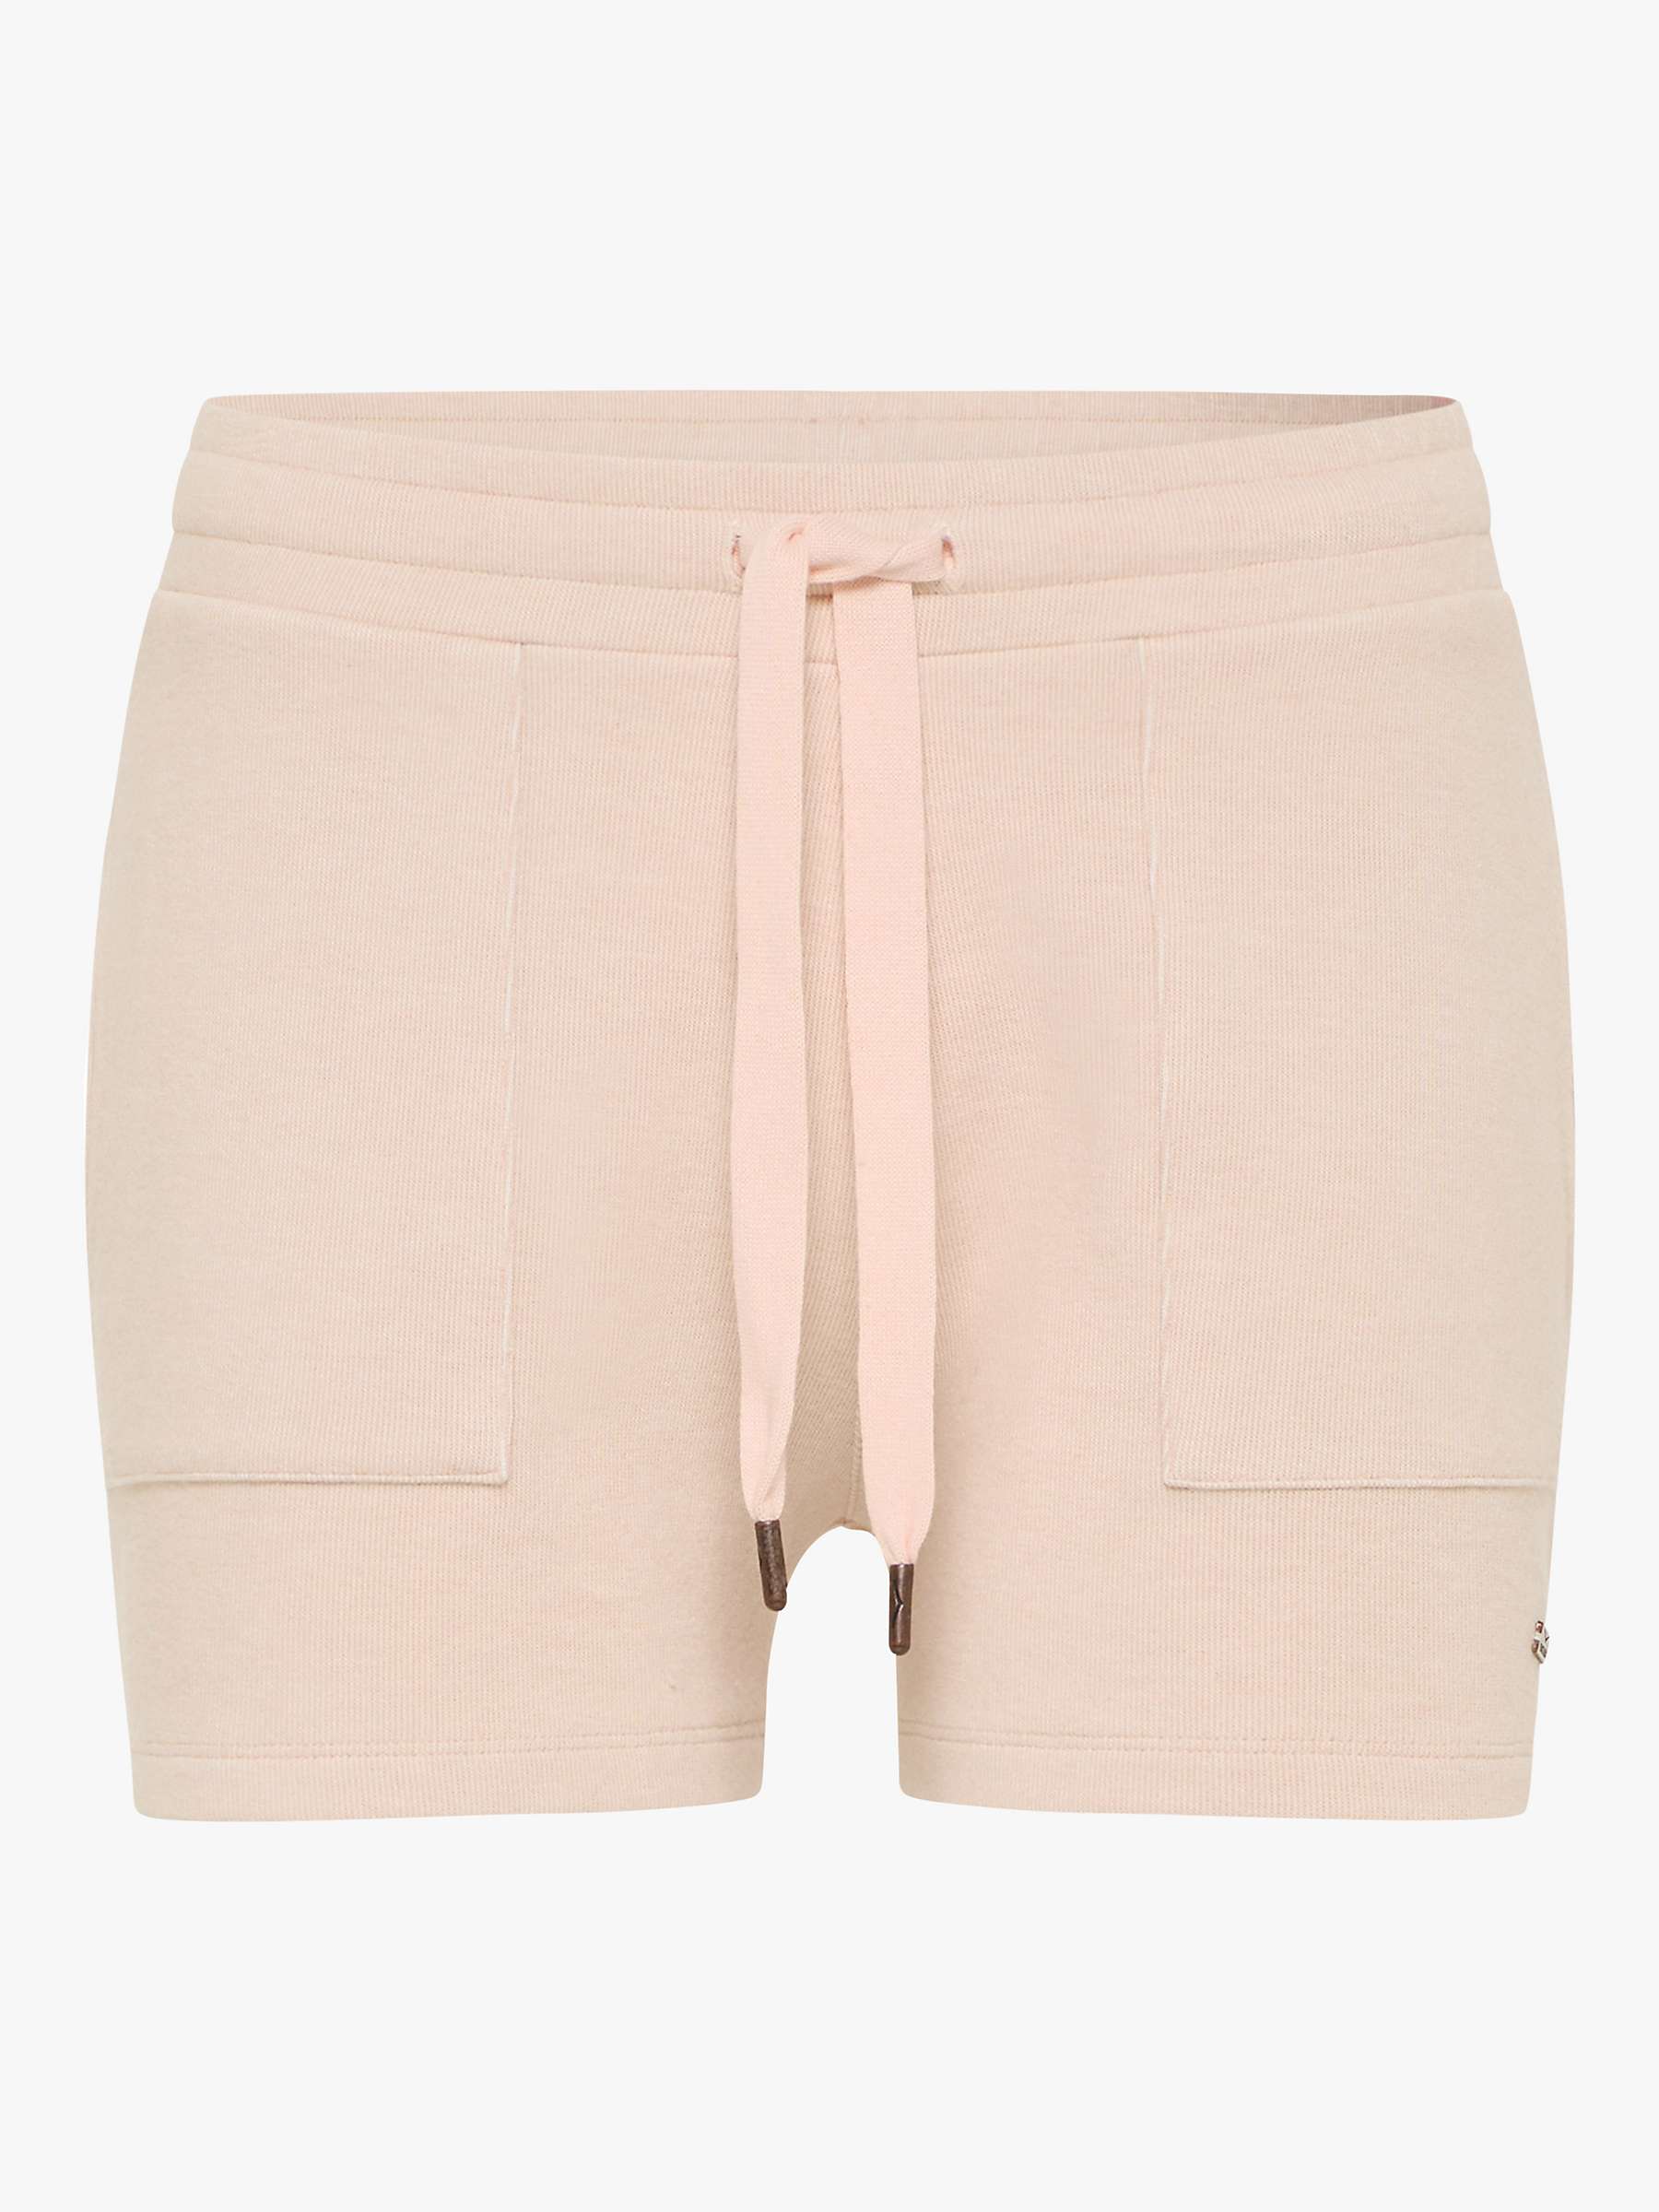 Buy Venice Beach Aileen Shorts, Marble Pink Online at johnlewis.com